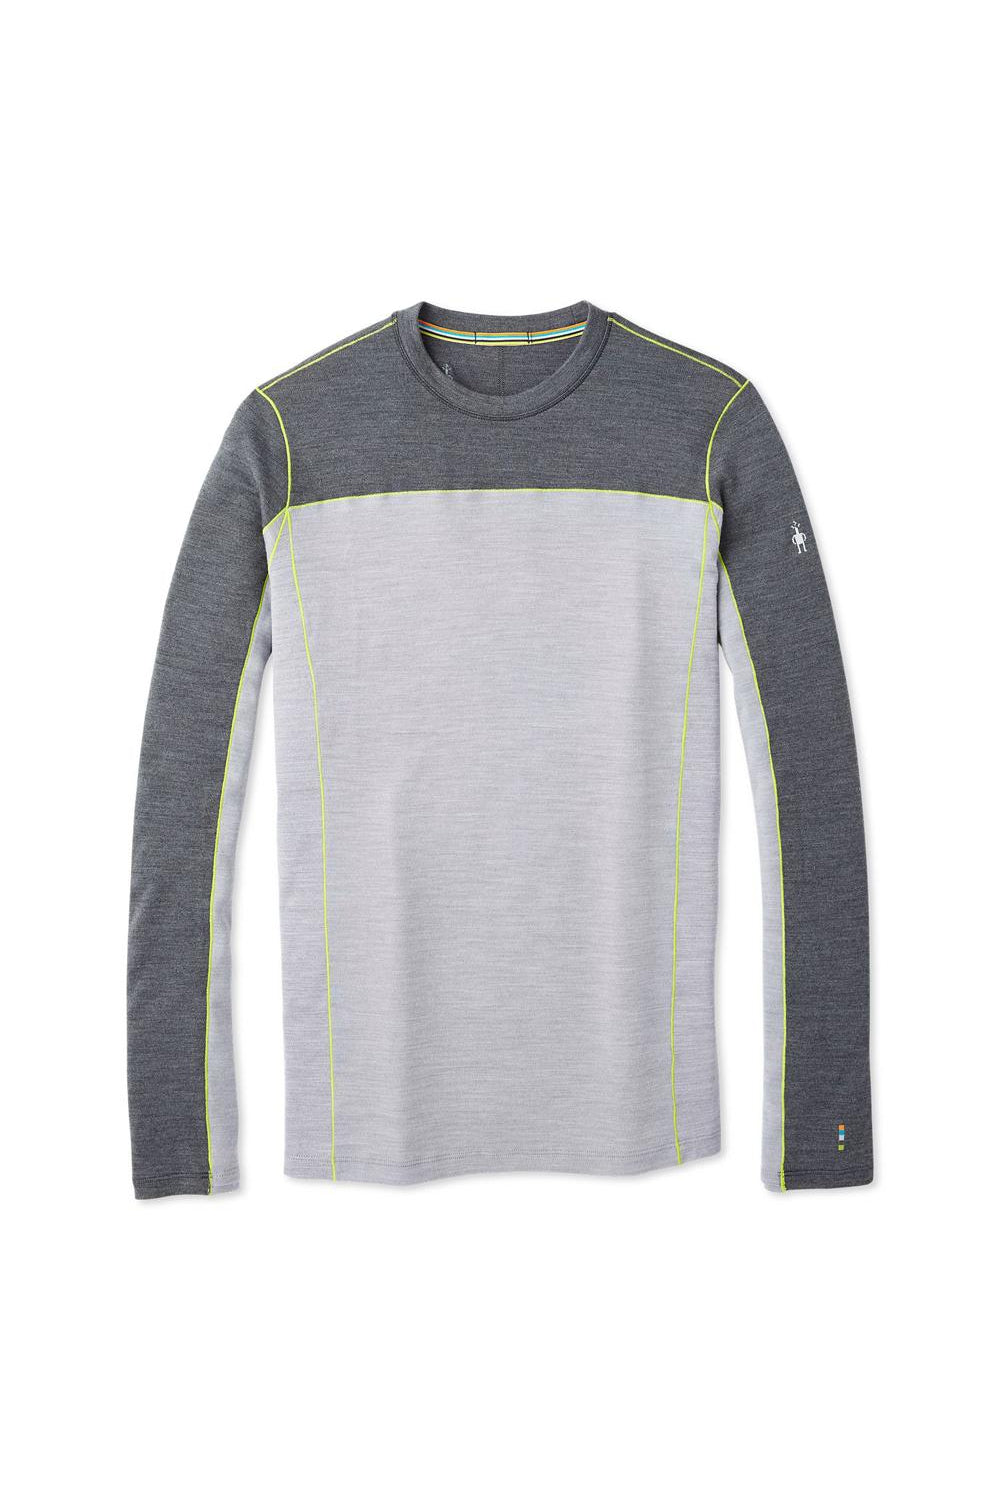 Men's Smartwool Merino Sport 250 Long Sleeve Crew Shirt in Charcoal Heather from the front